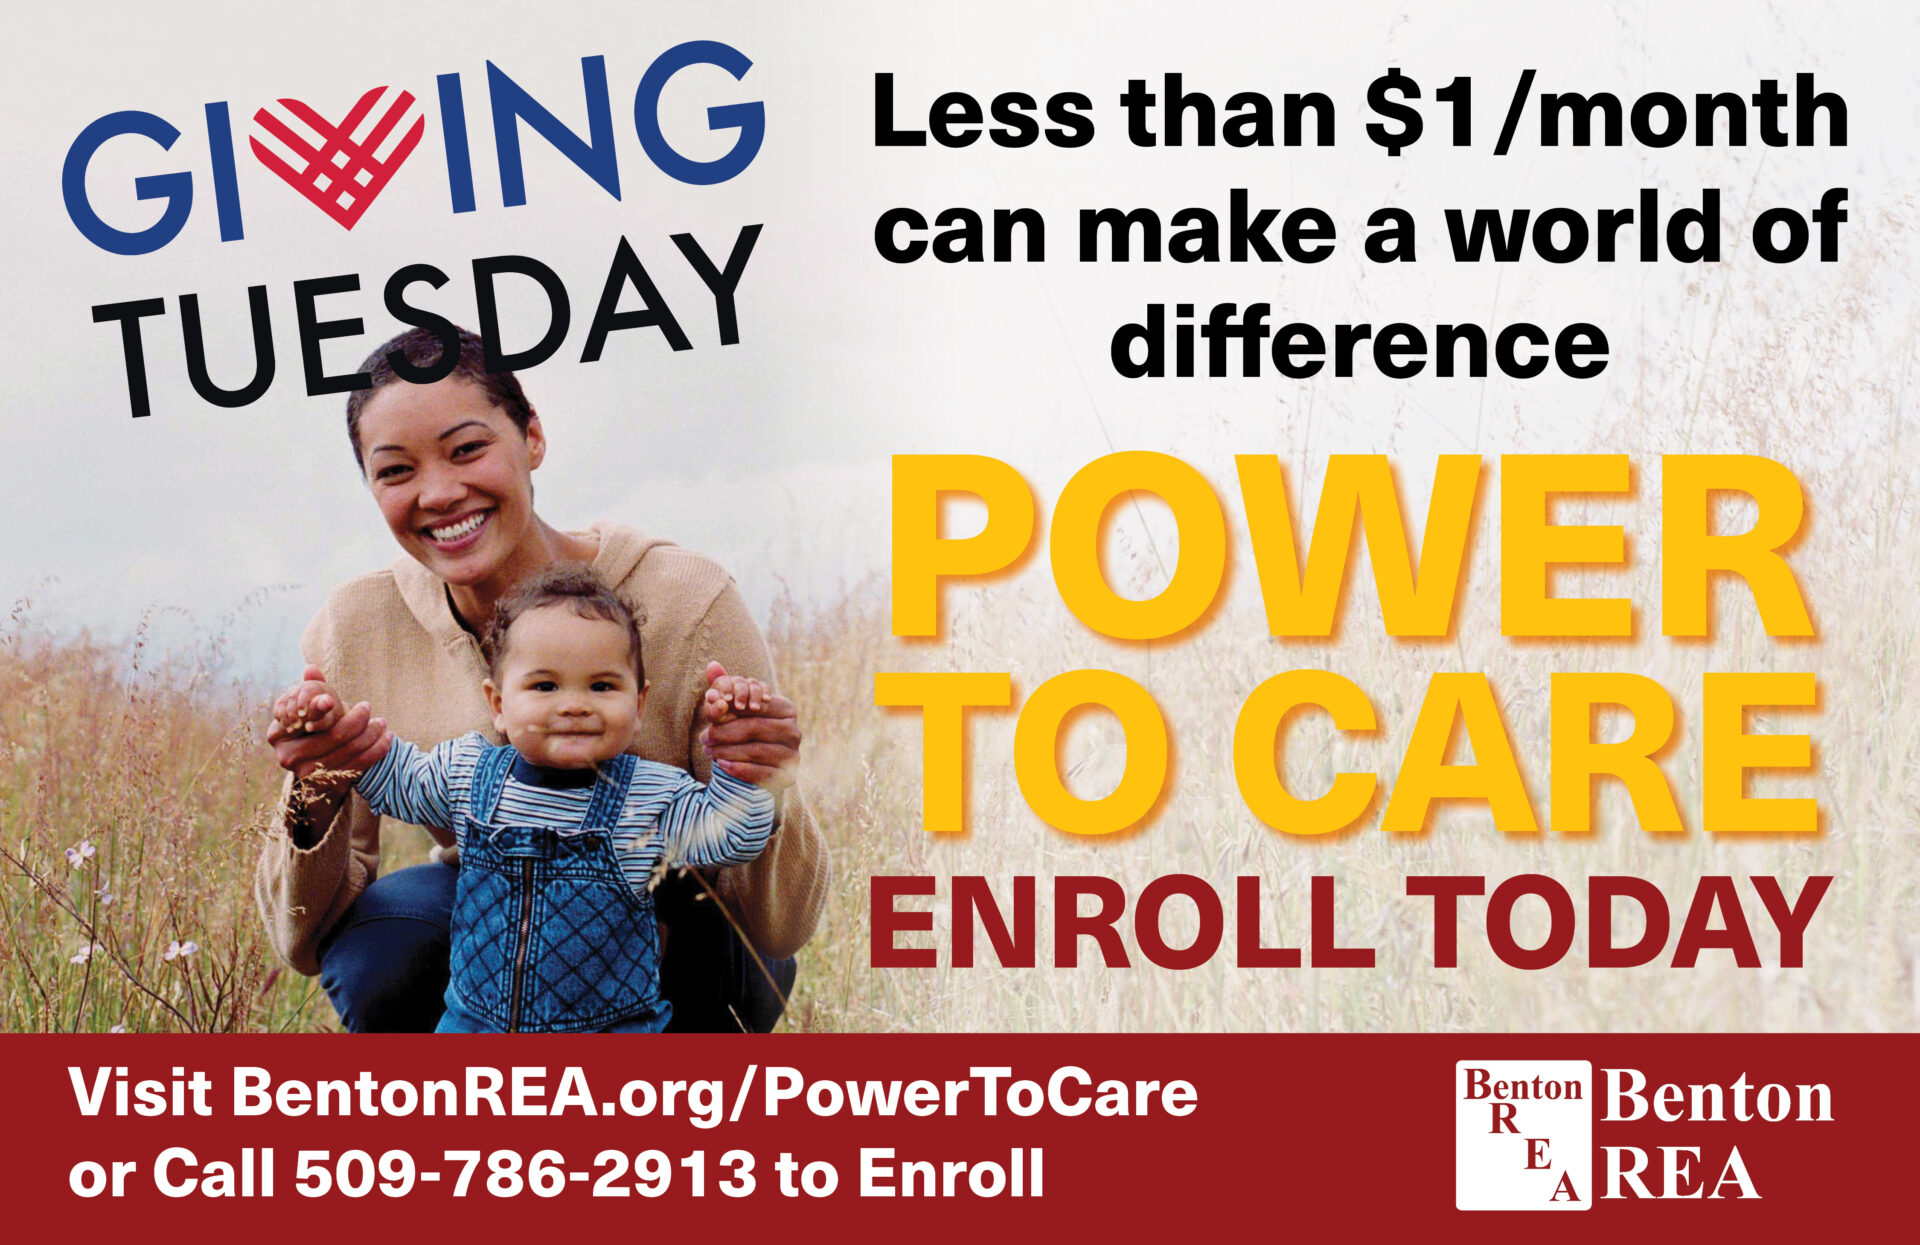 Less than $1/month can make a world of difference - Power to Care Giving Tuesday